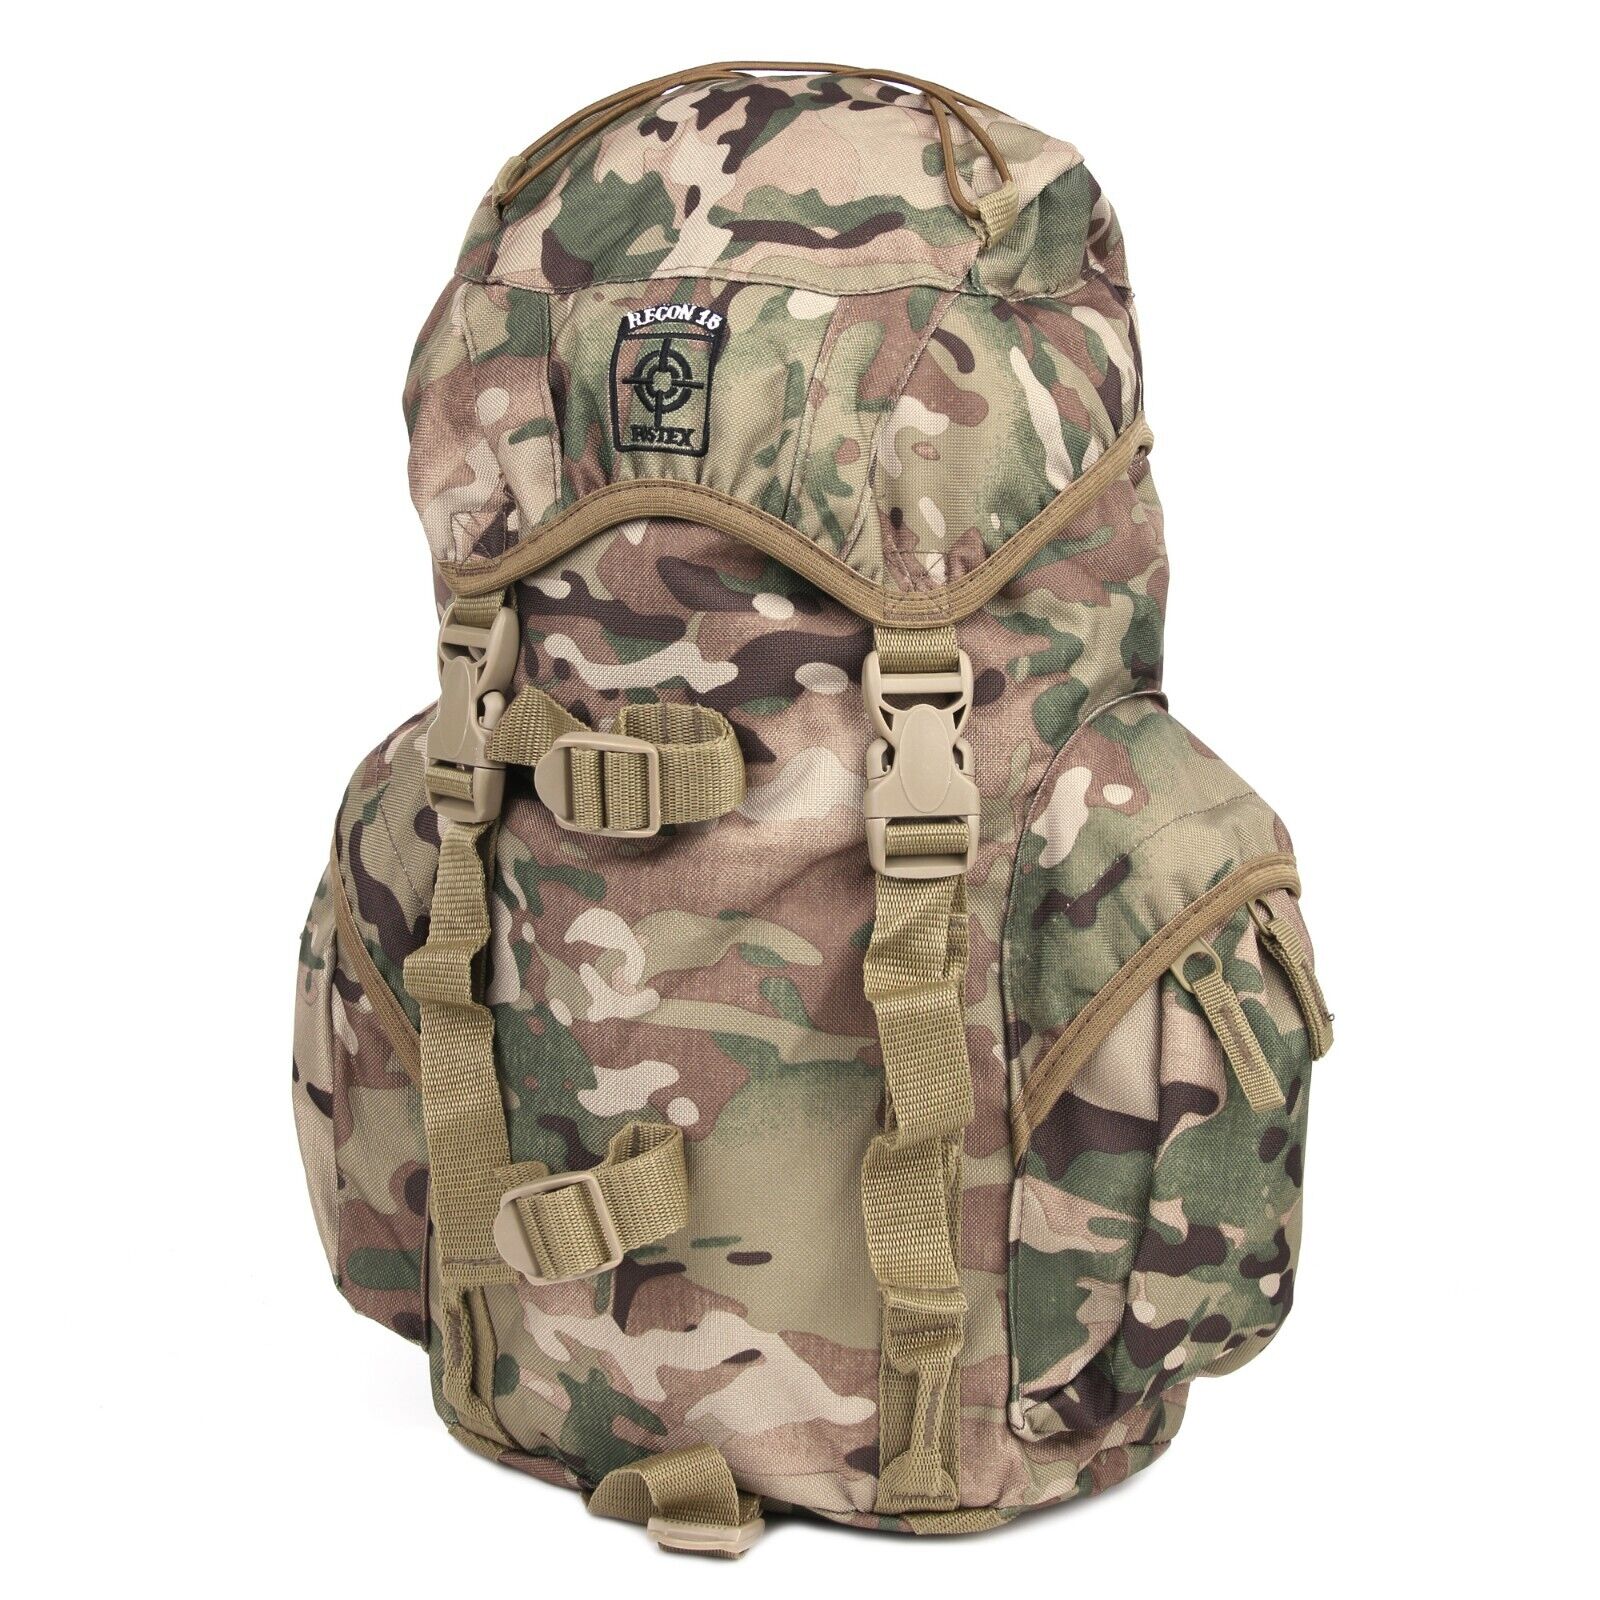 British Army Style 25L Backpack MTP MULTICAM Camo Day Sack Small Pack Rucksack